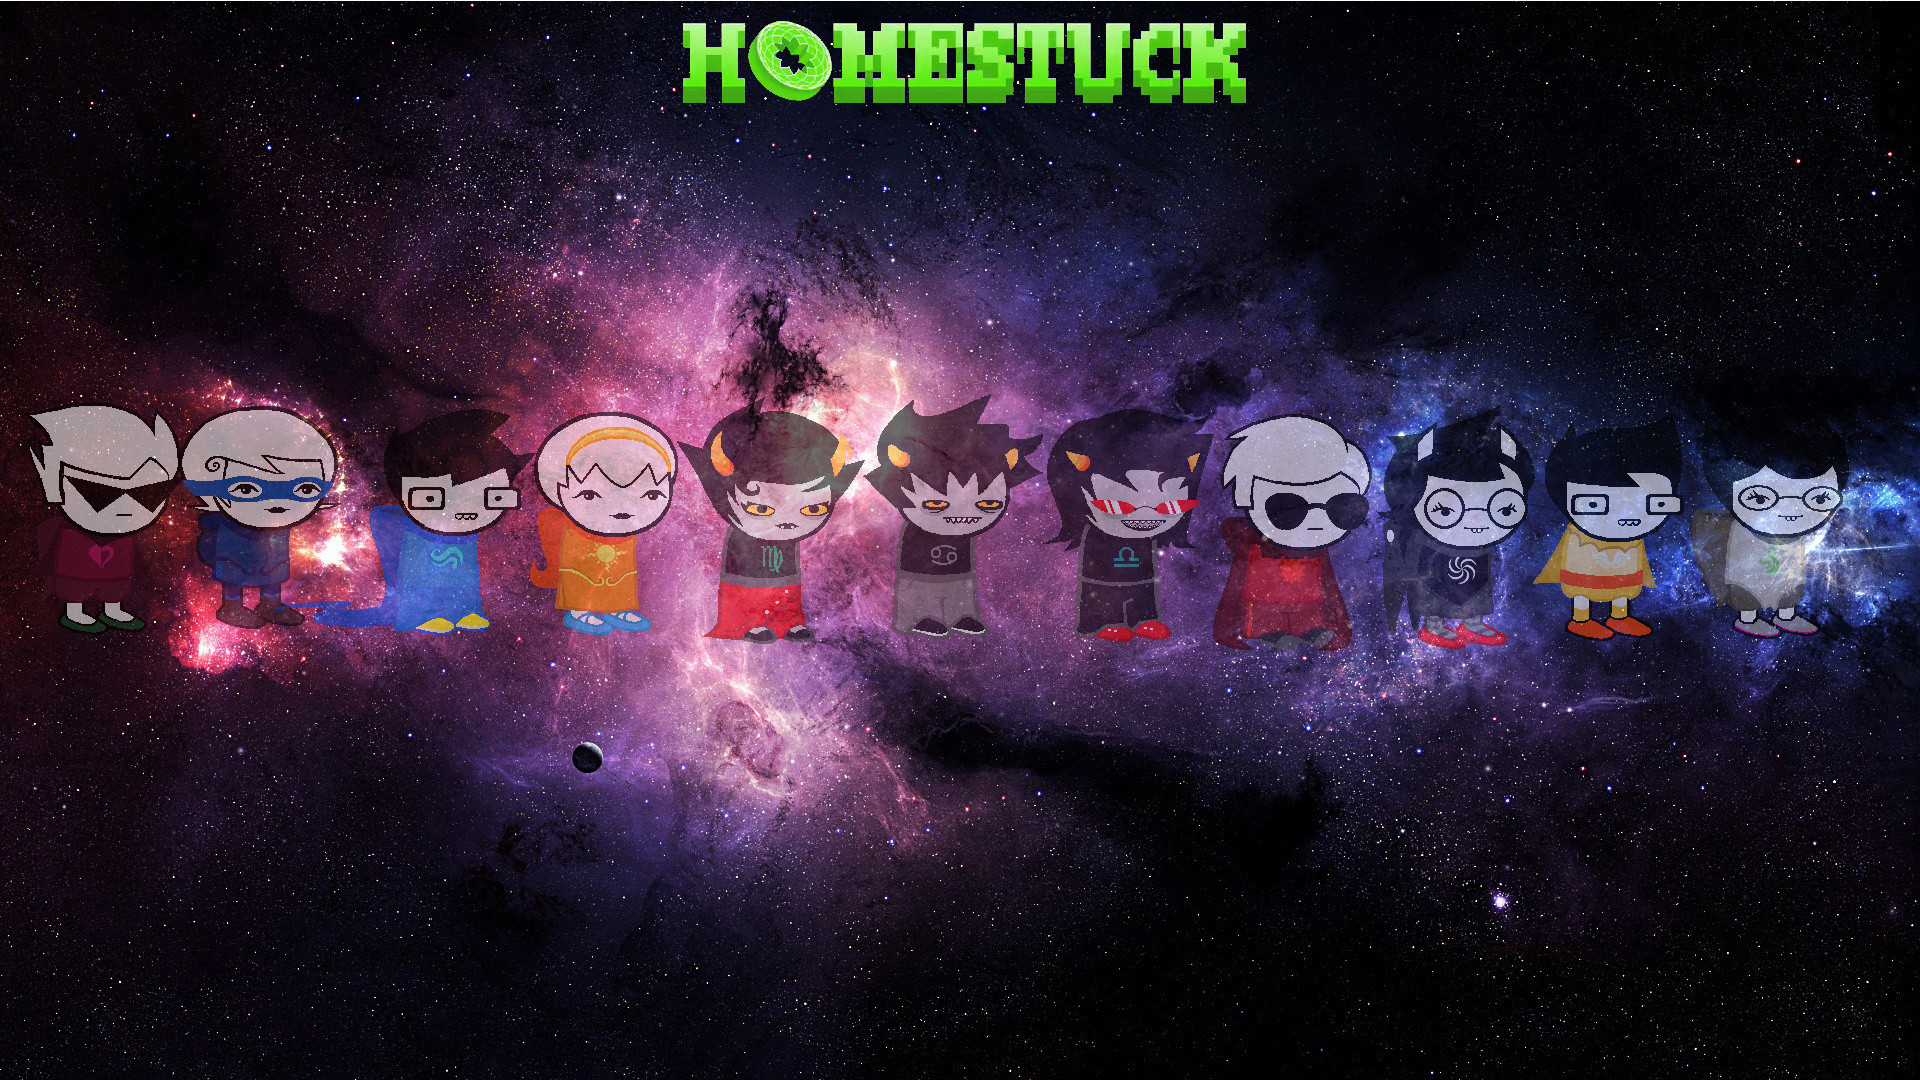 Made a Homestuck Wallpaper for you guys! [1920×1080] Need #iPhone #6S #Plus  #Wallpaper/ #Background for #IPhone6SPlus? Follow iPhone 6S Plus 3Wallp…